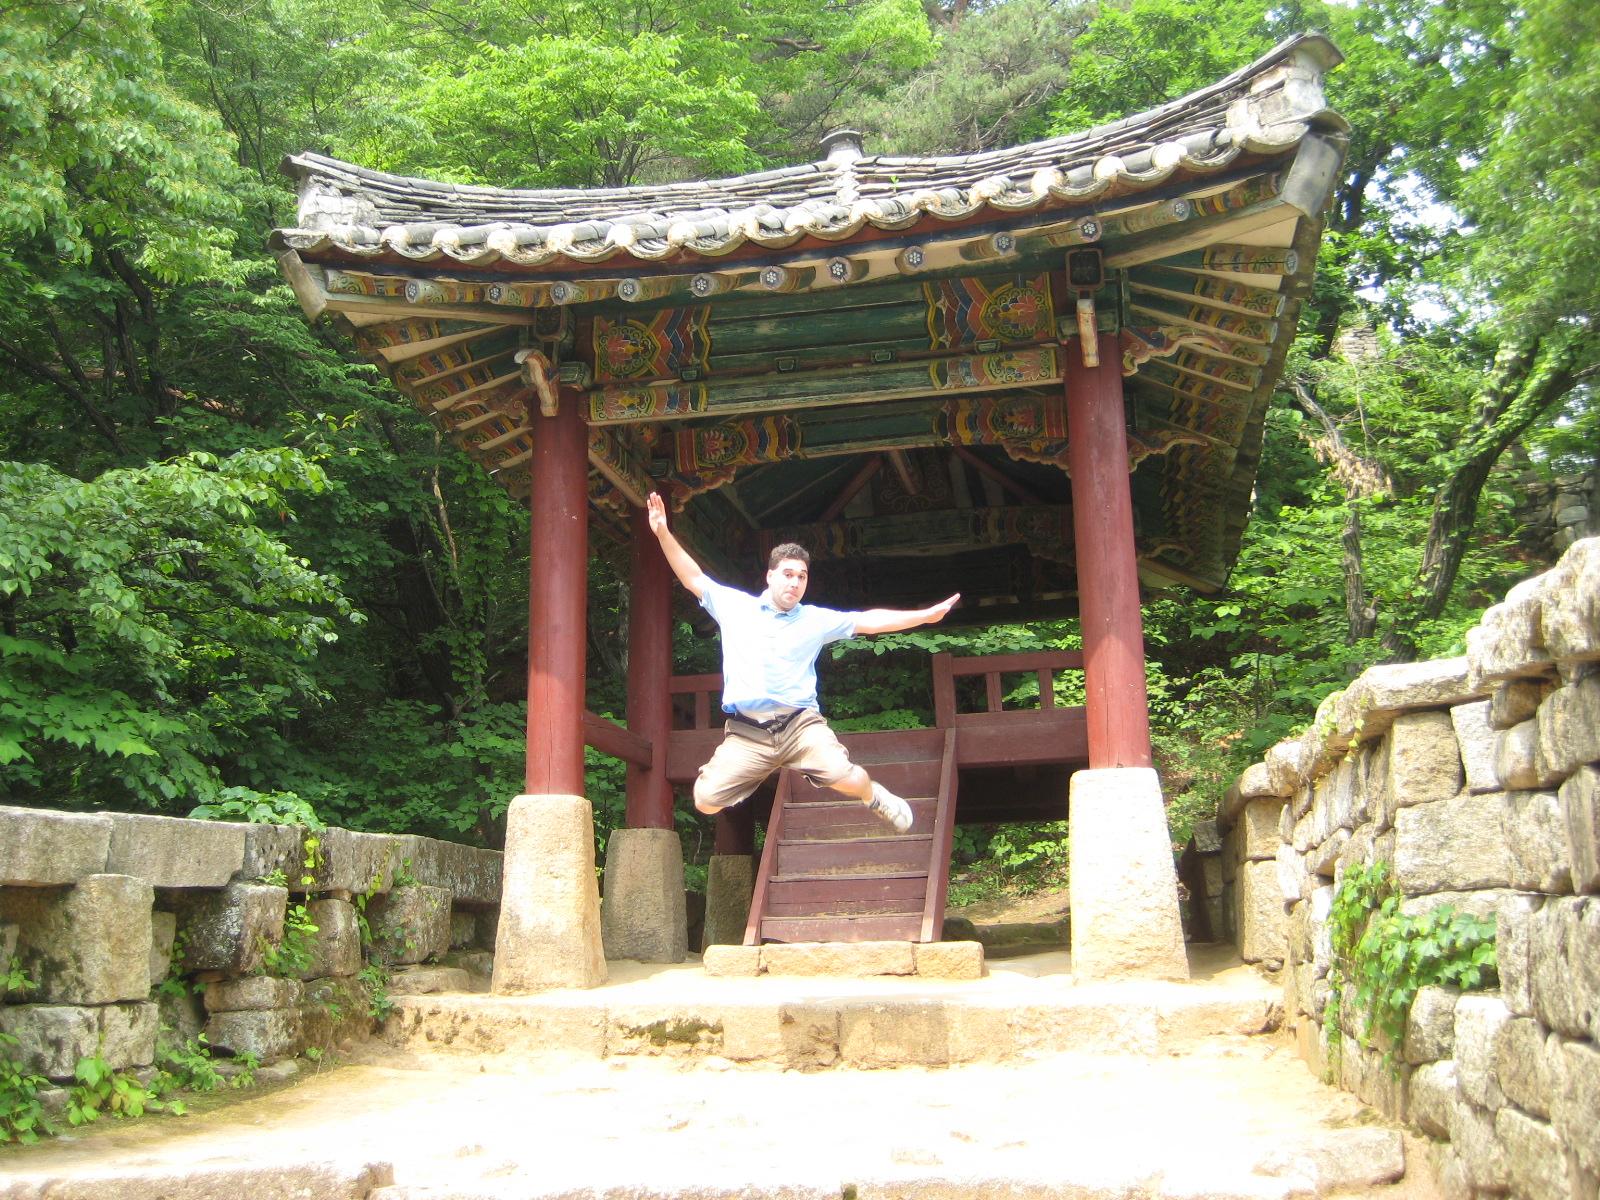 Jumping for joy in North Korea - can you believe I took this with the timer on the very first try?  Oh and Bakyeon Waterfall Pavillion behind me is pretty cool too.